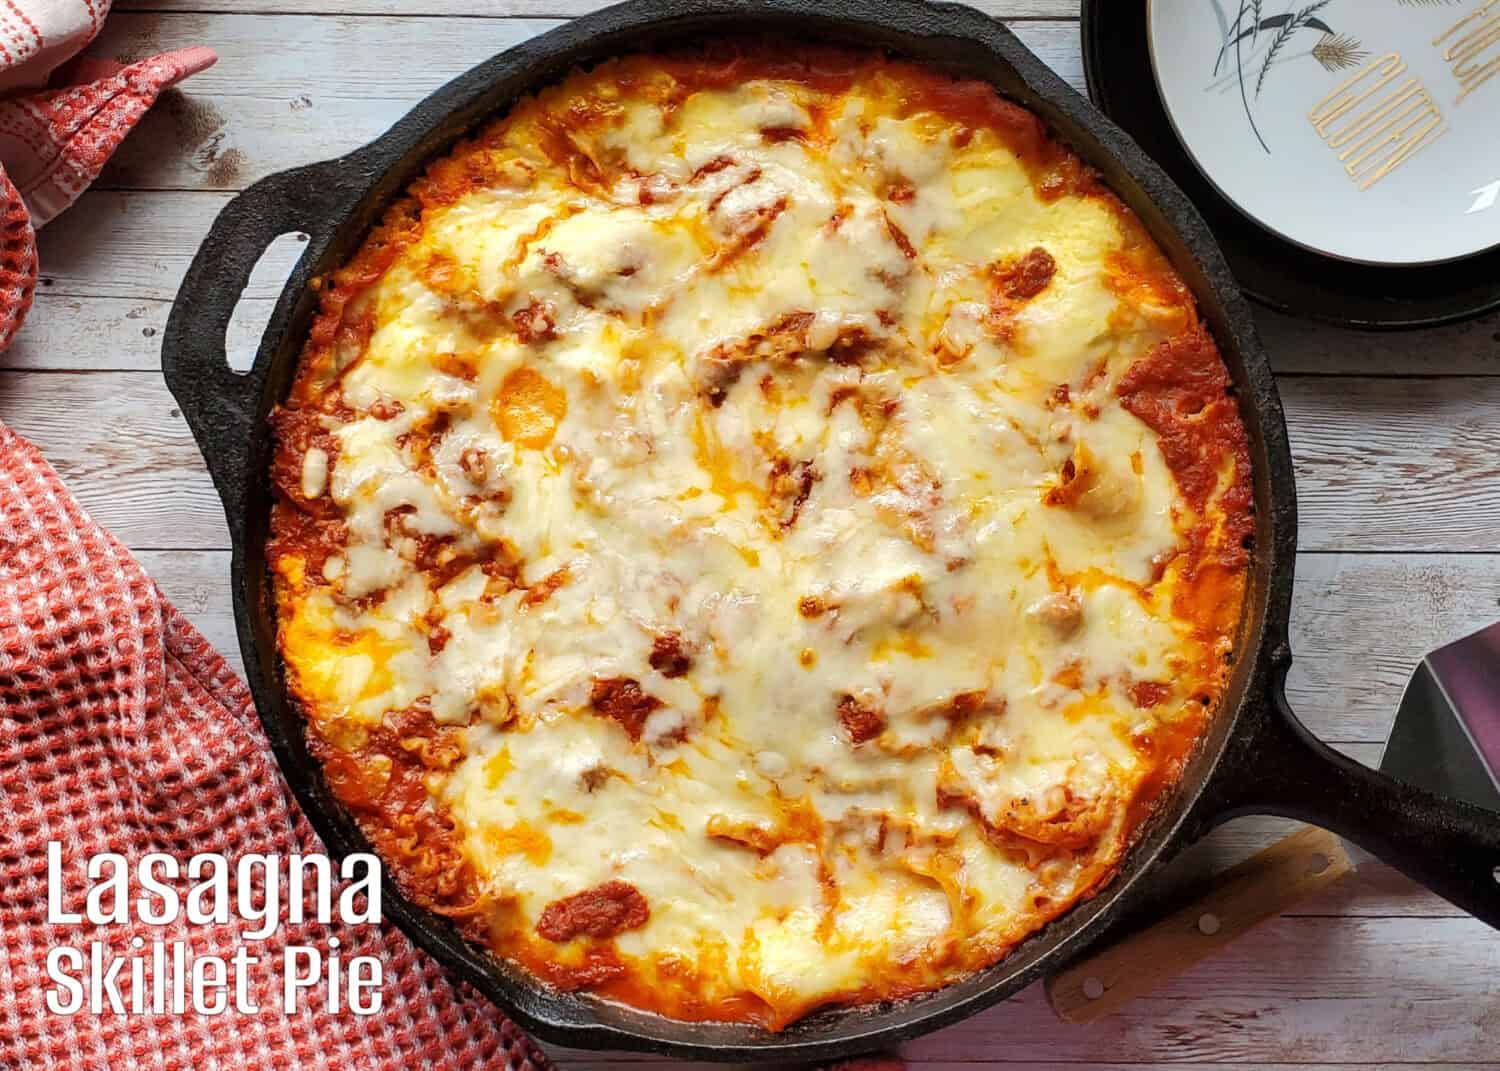 Lasagna Skillet Pie has the same rich Italian sauce, loaded with Parmesan, mozzarella and ricotta cheeses, baked in a cast iron skillet. No layering of ingredients and no fear of broken noodles.